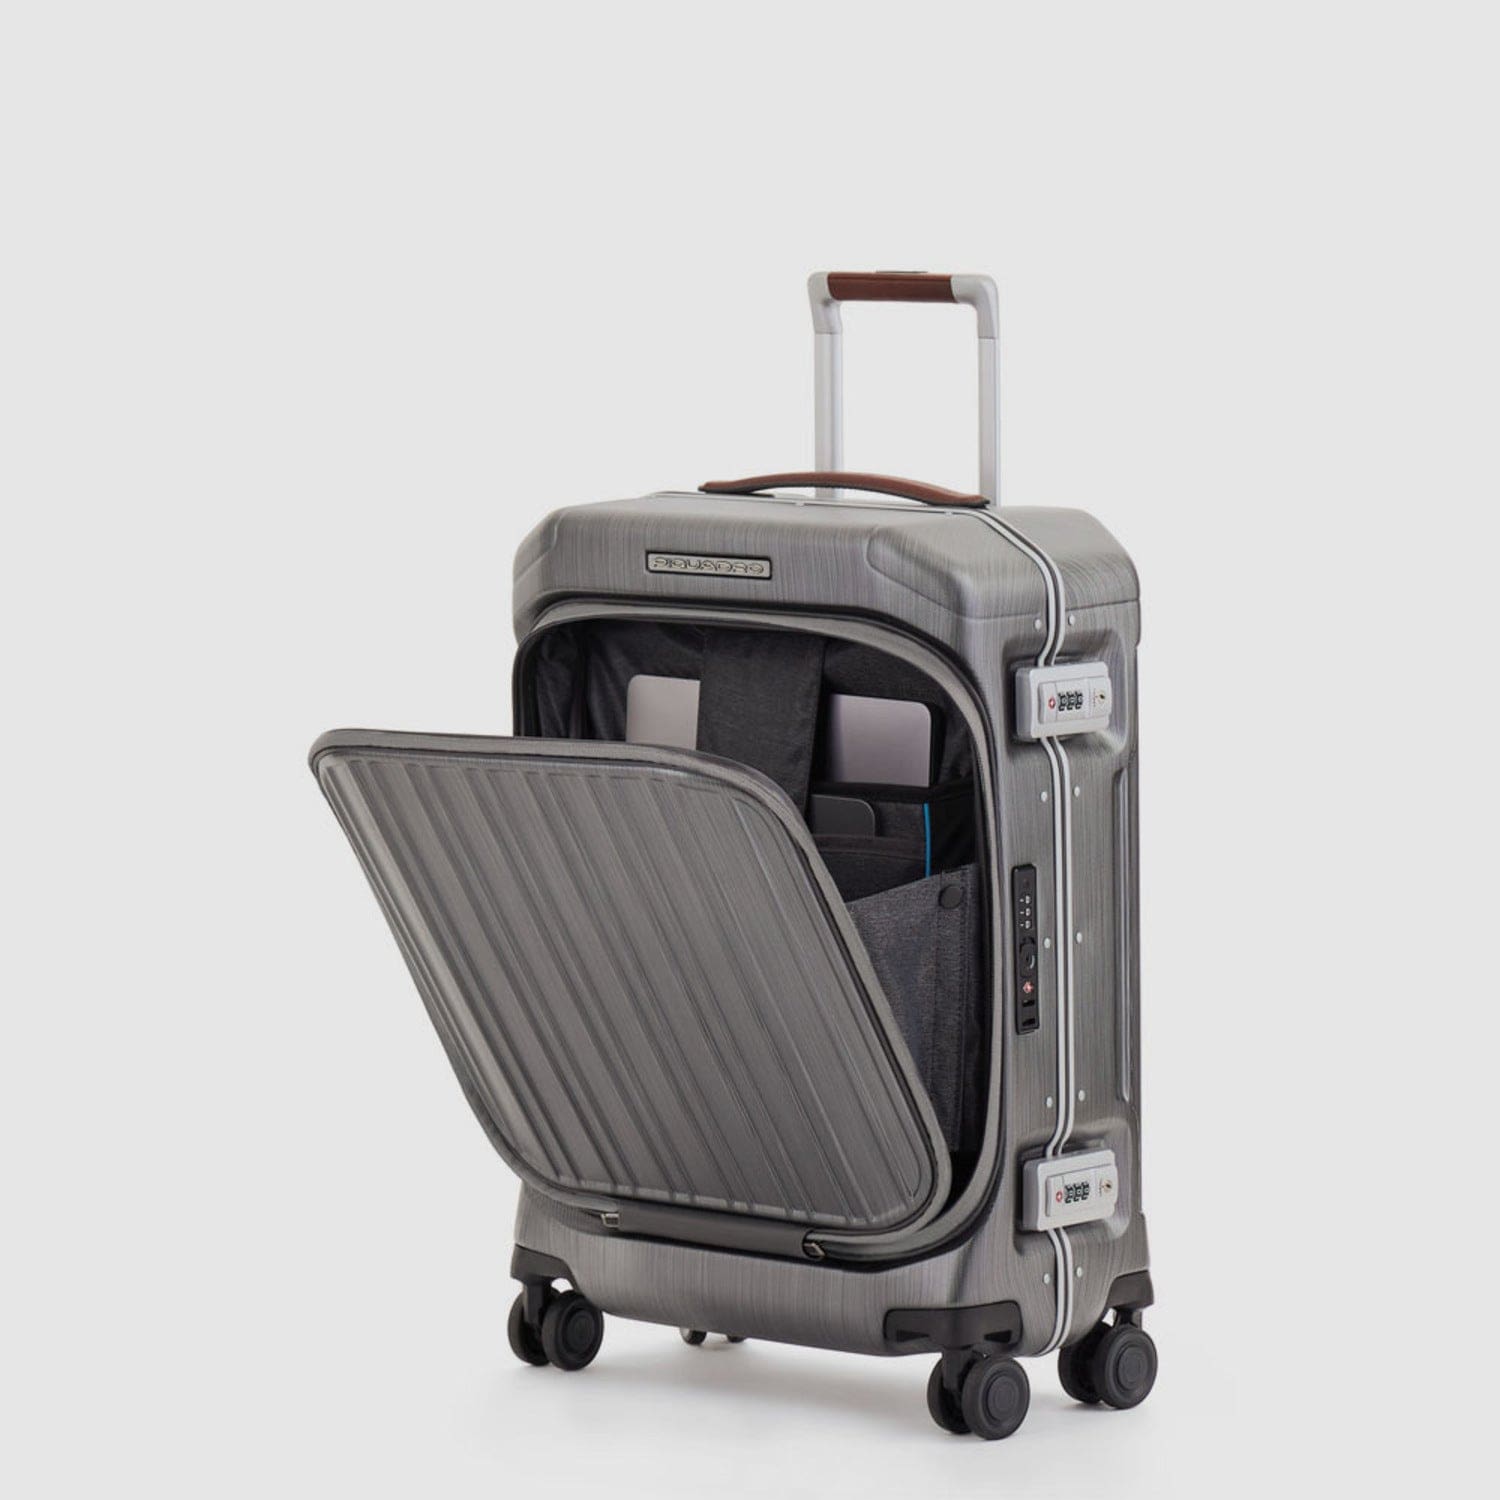 Piquadro Pqlm-Frame 55Cm Fast-Check With Compute Holder Hardcase 4 Double Wheel Cabin Luggage Trolley Black / Light Brown - Bv4426Pqlm/Ncu